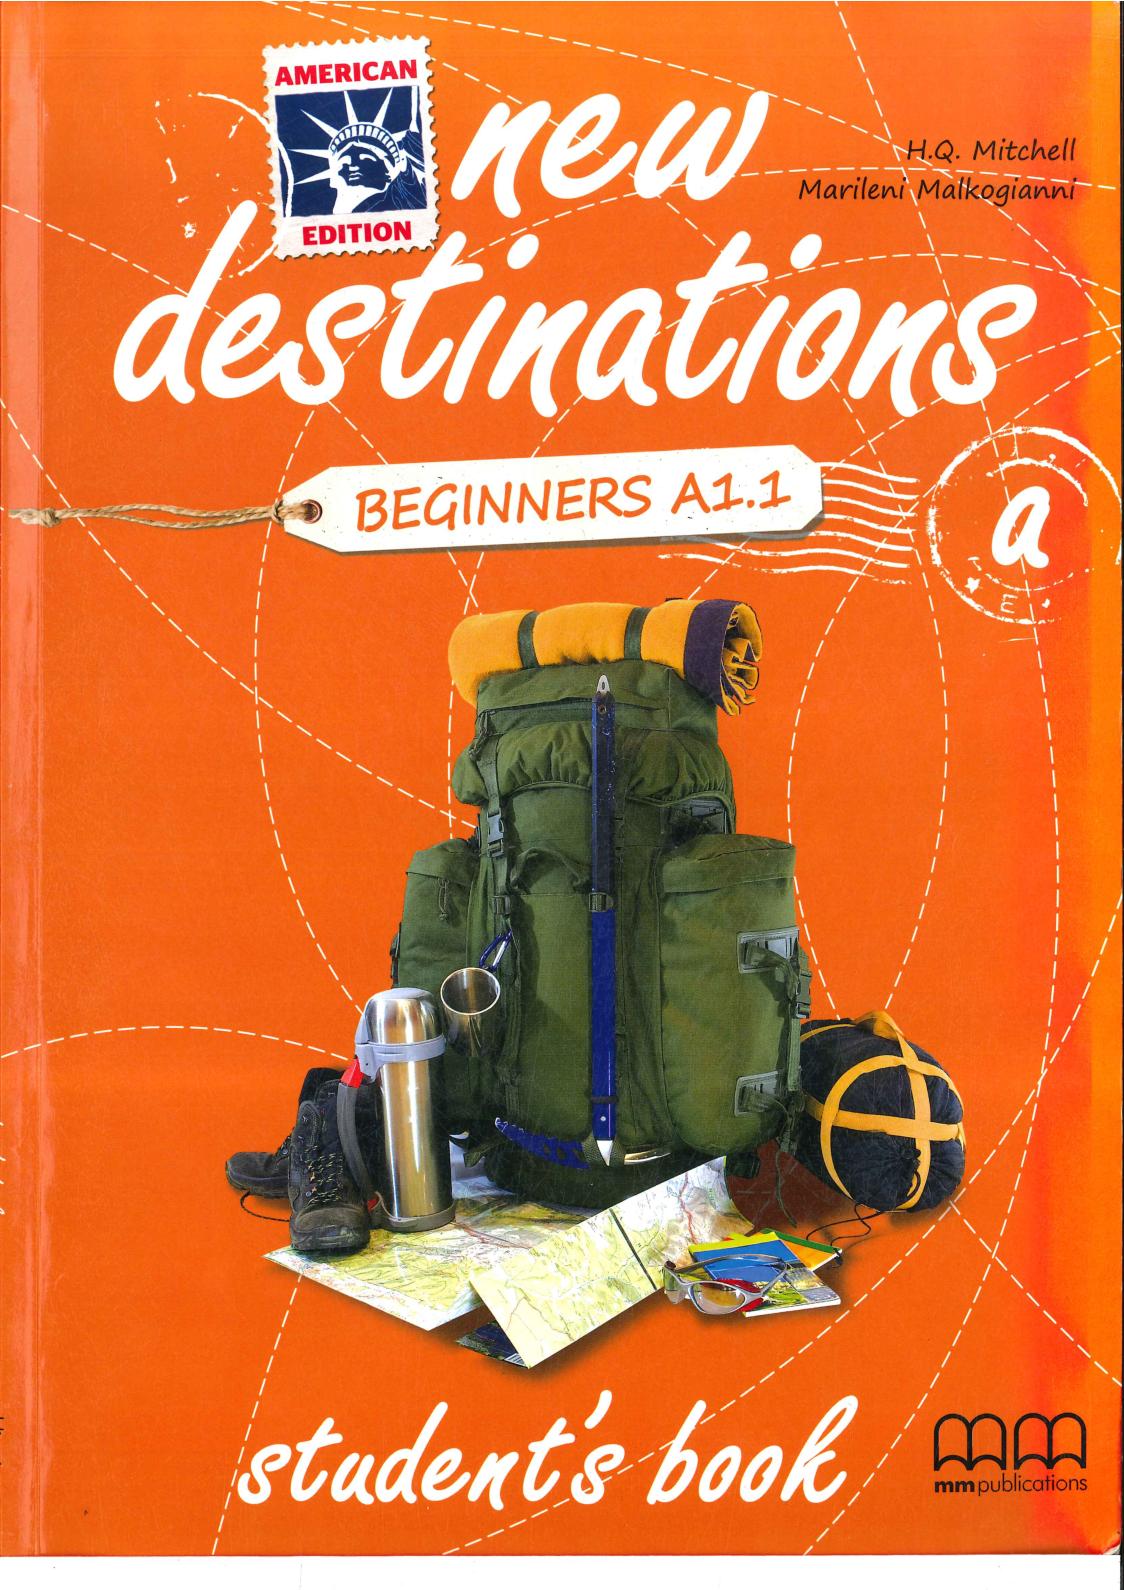 MM Publications: Sách học tiếng Anh - New Destinations Beginners a - Student's Book (American Edition)